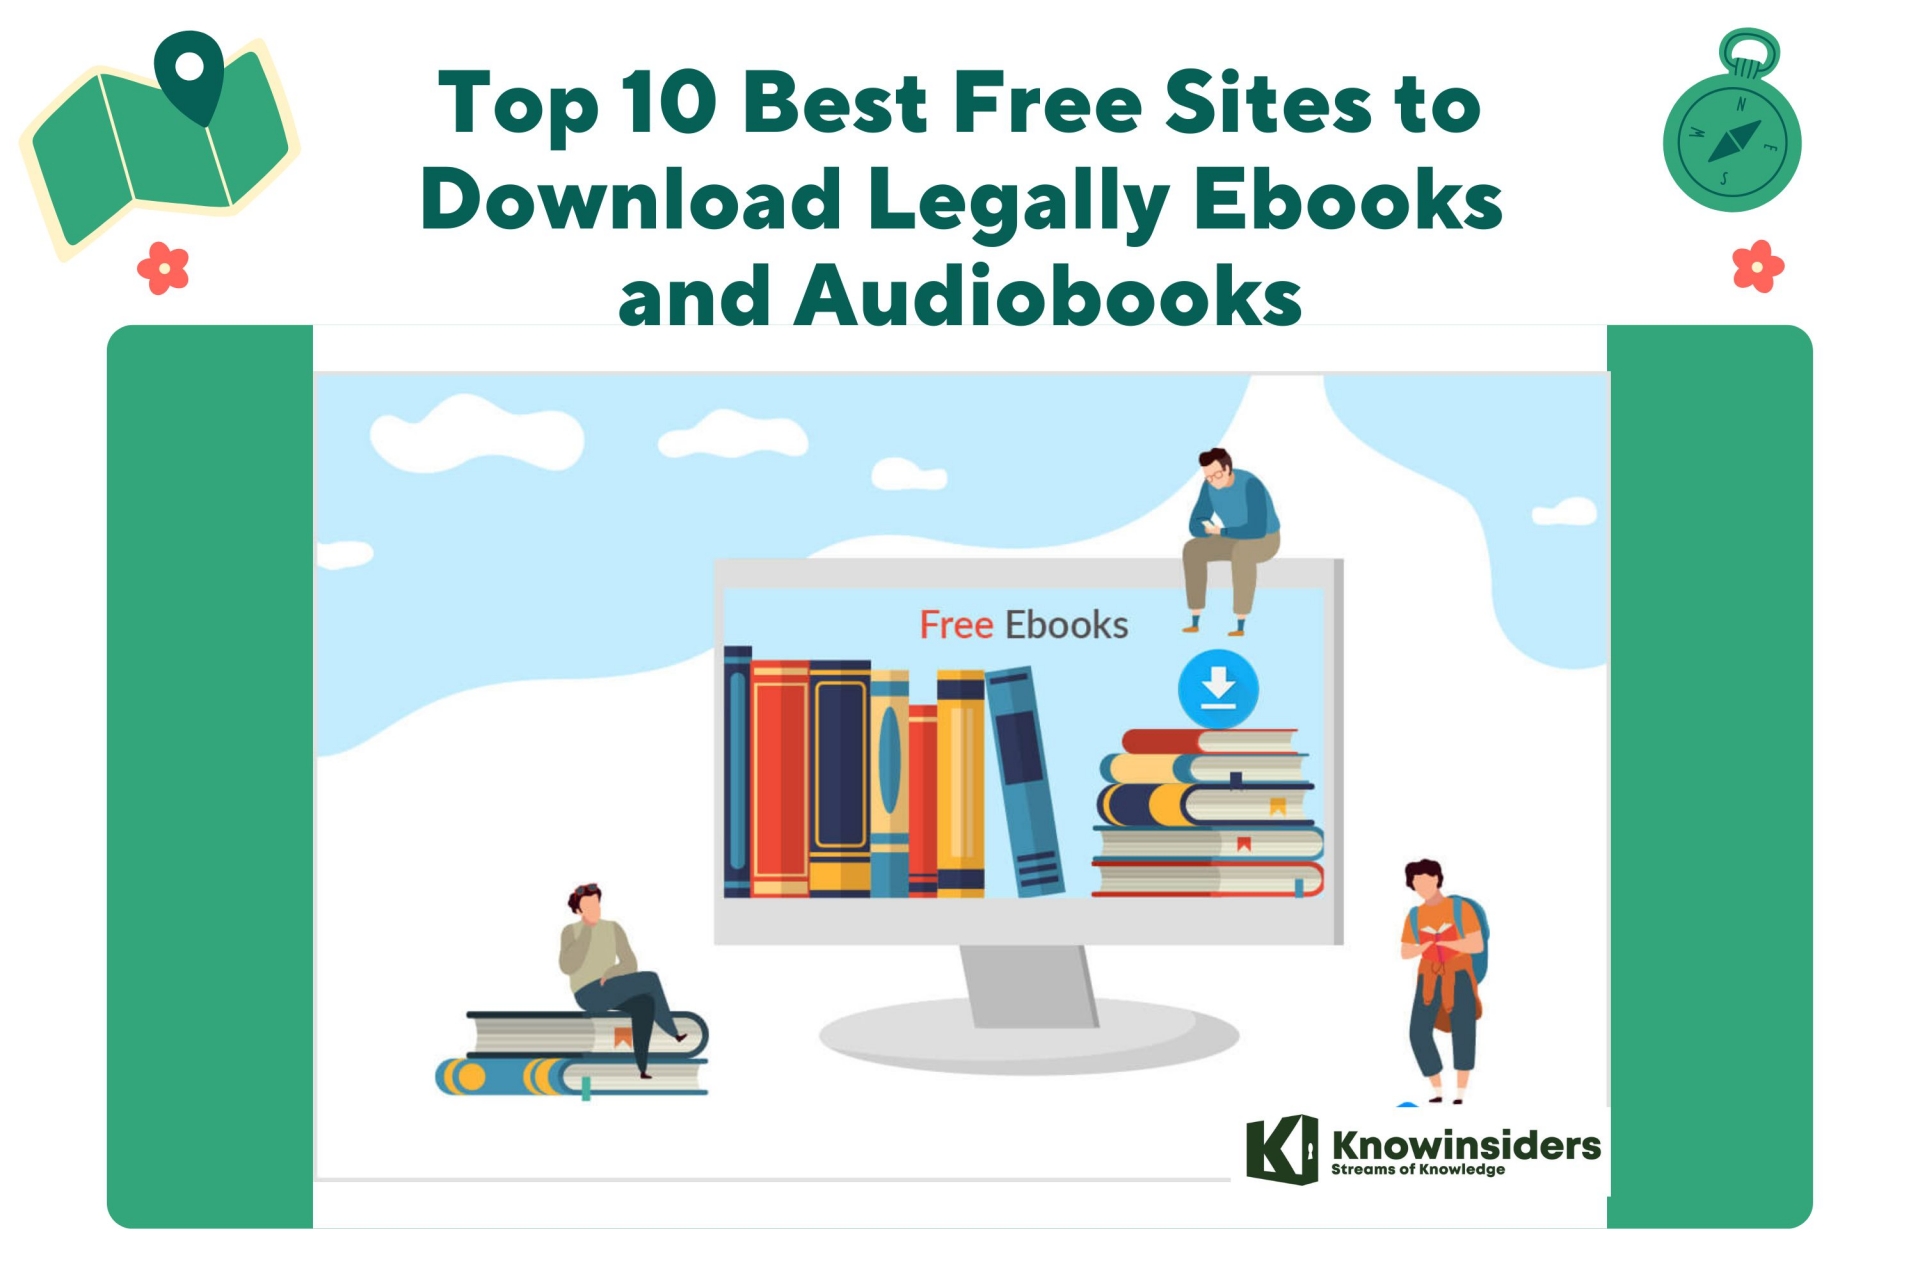 Top 10 Best Free Sites to Download Legally Ebooks and Audiobooks